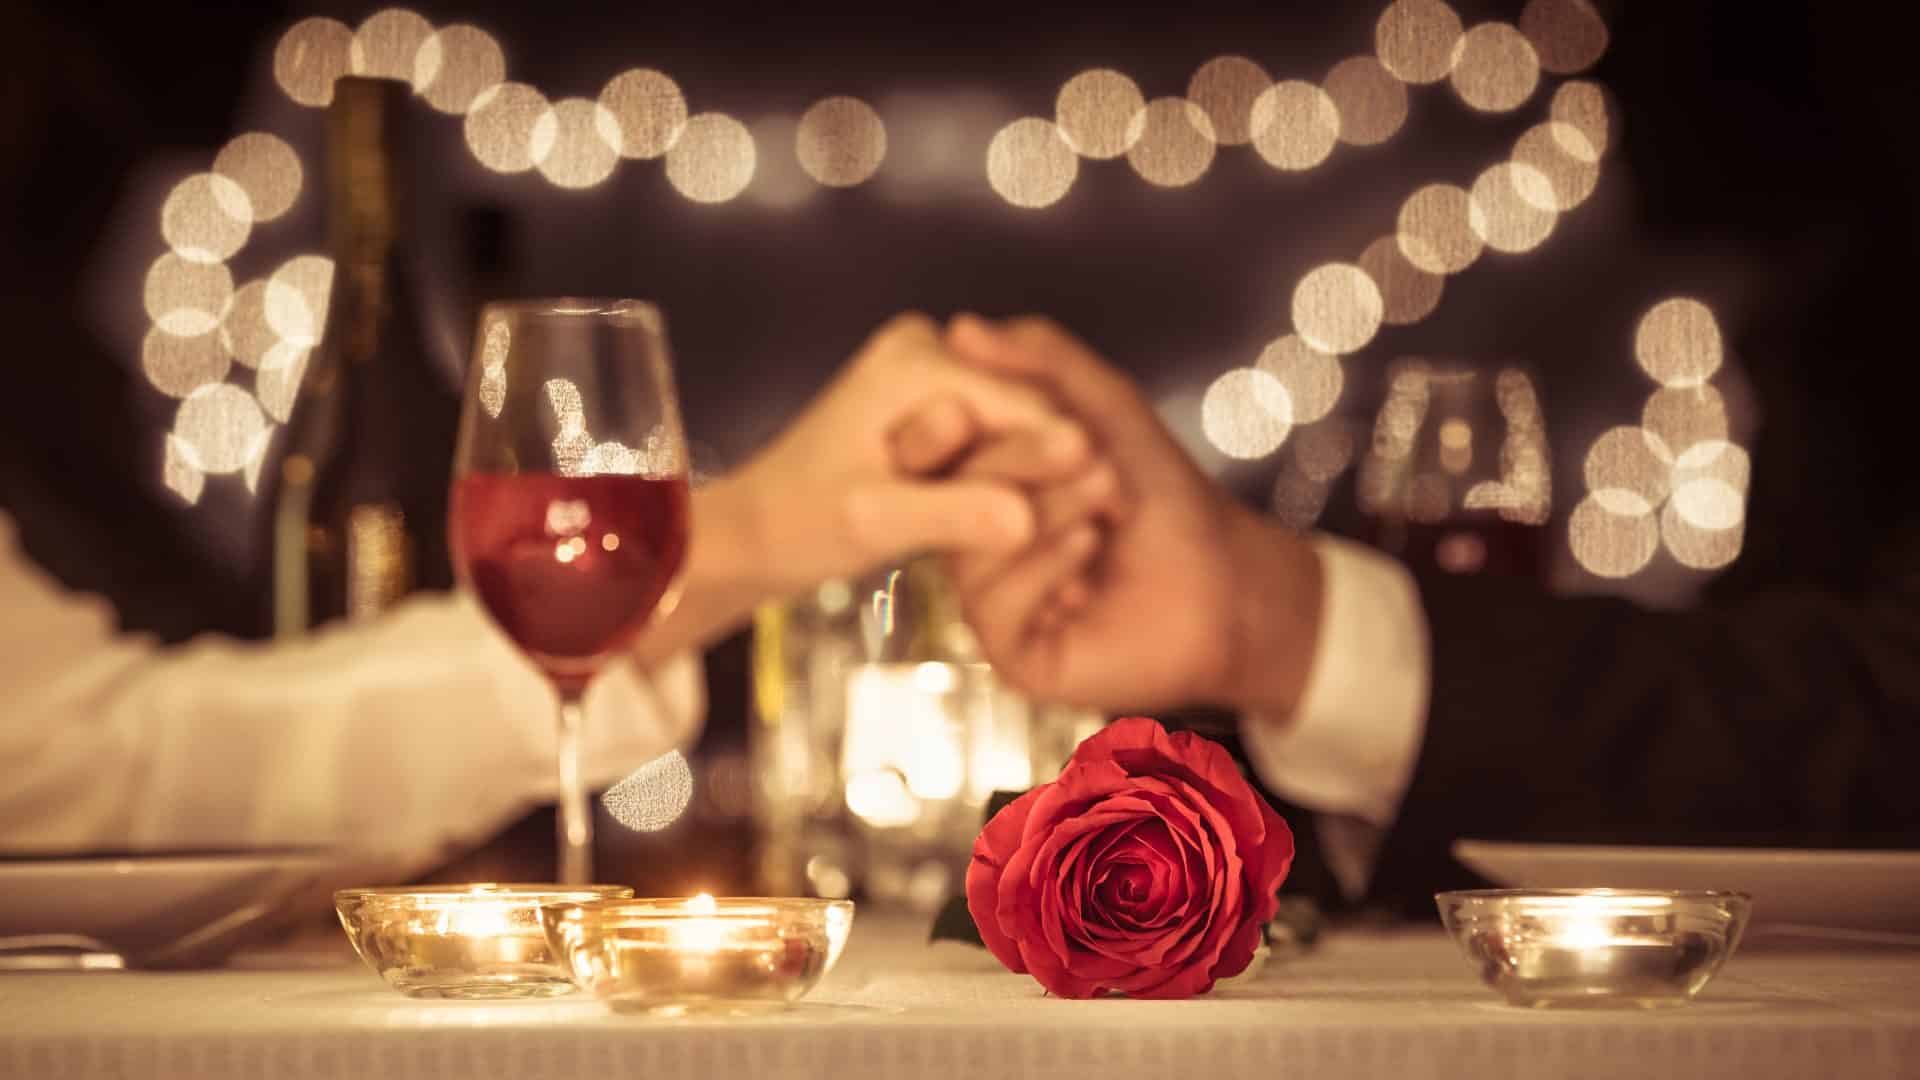 Couple holding hands across a romantic, candlelit dinner table with red wine and a red rose.